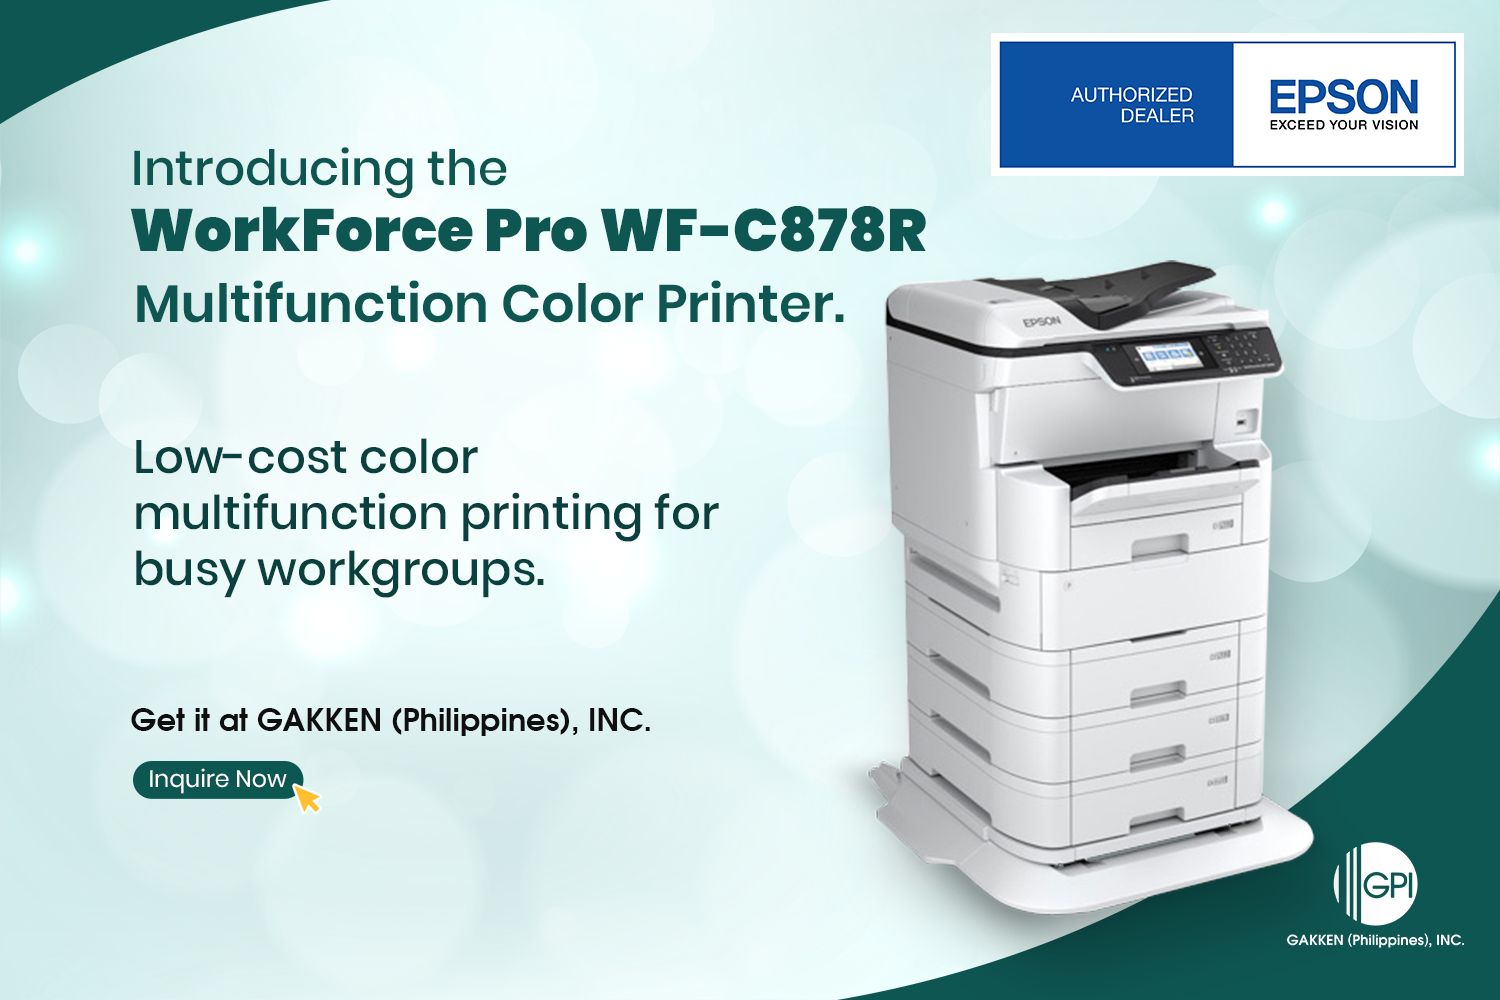 INTRODUCING THE WorkForce Pro WF-C878R: Unparalleled Functionality